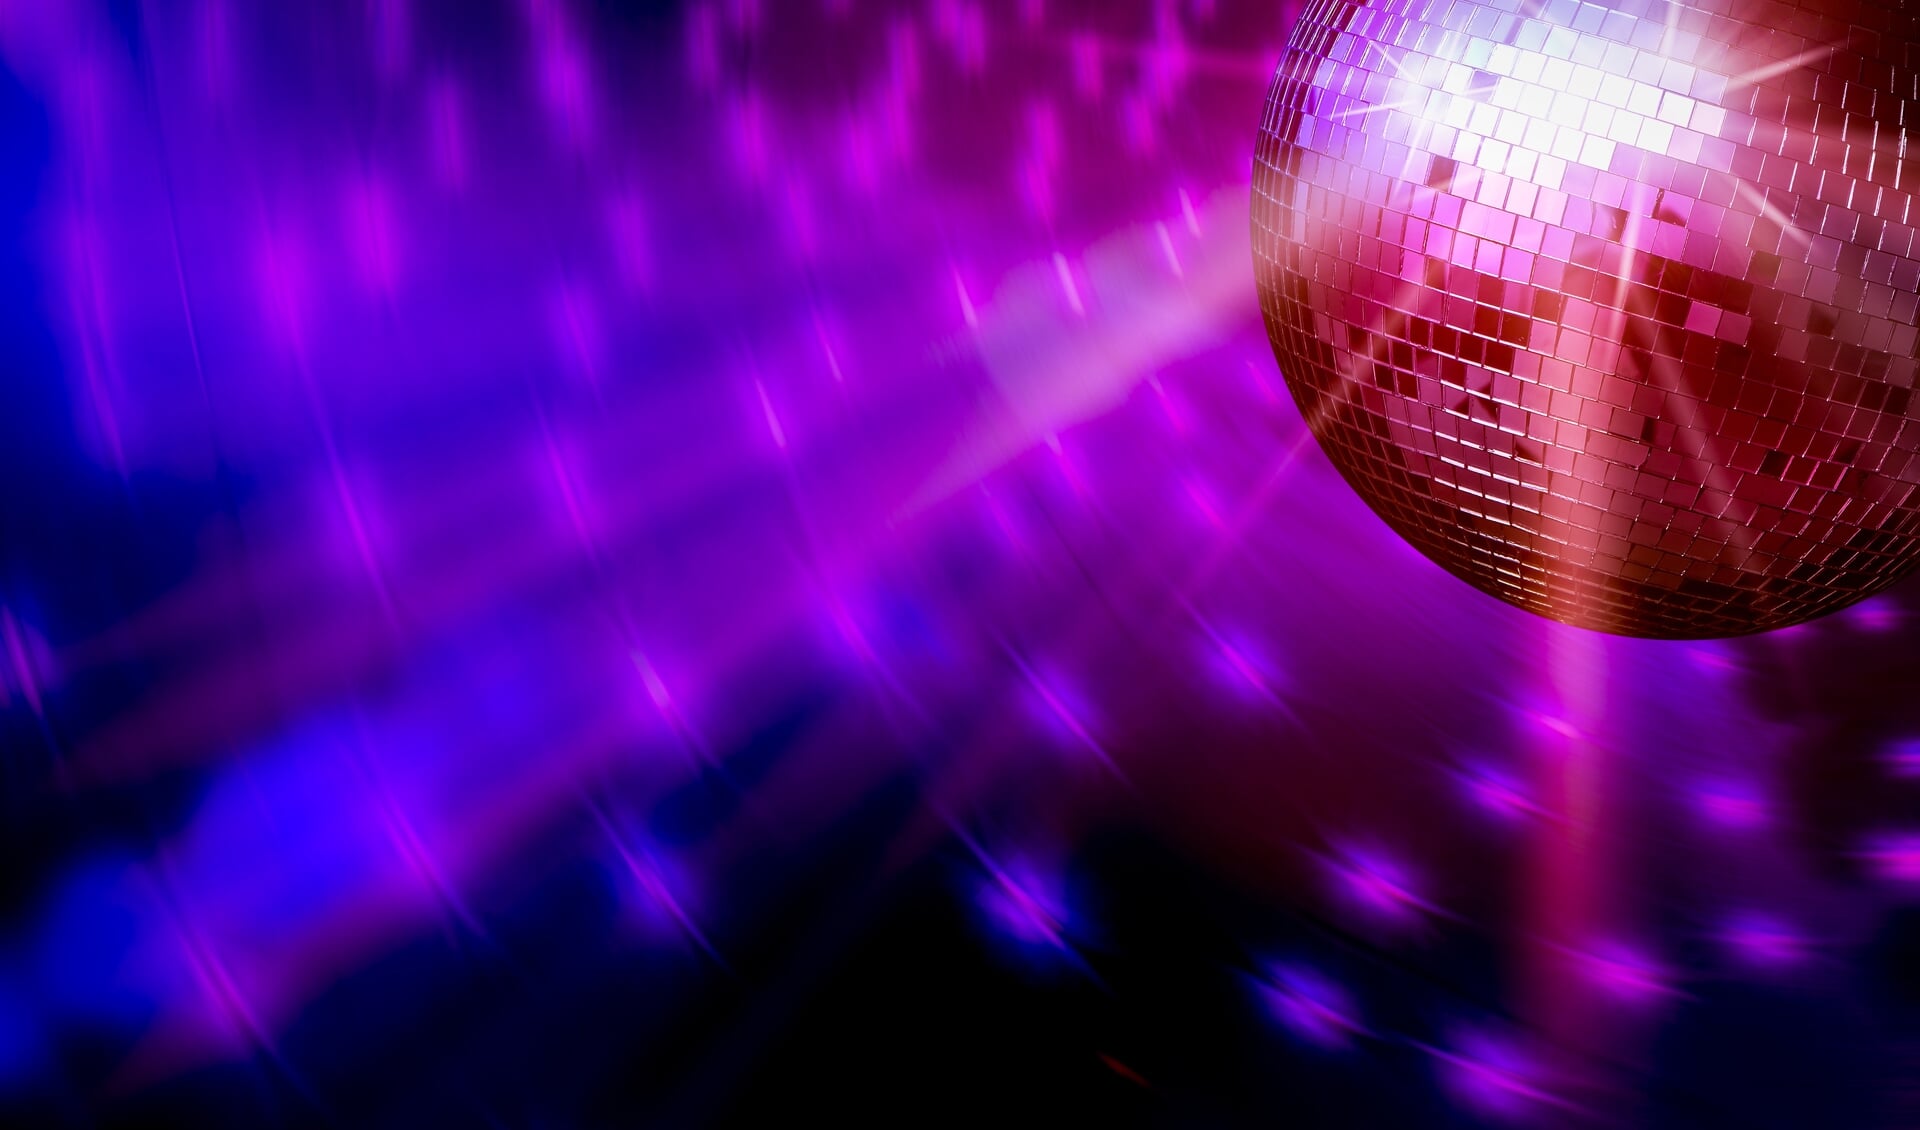 disco ball background space backdrop light discoball nightclub design graphic concept - stock image